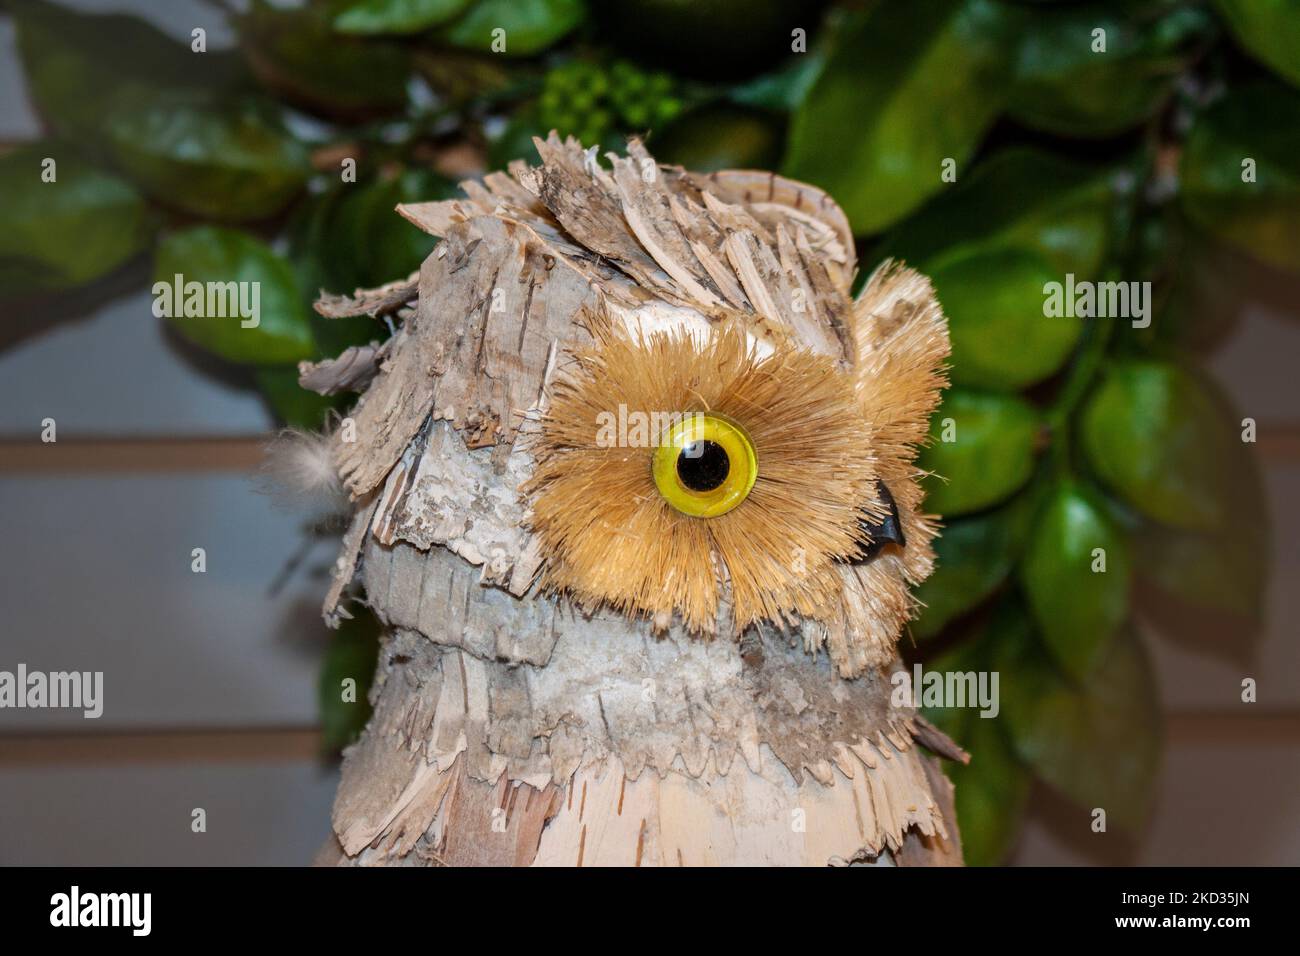 Close-up side view of head of decorative owl made of bark against a dark blurred background Stock Photo